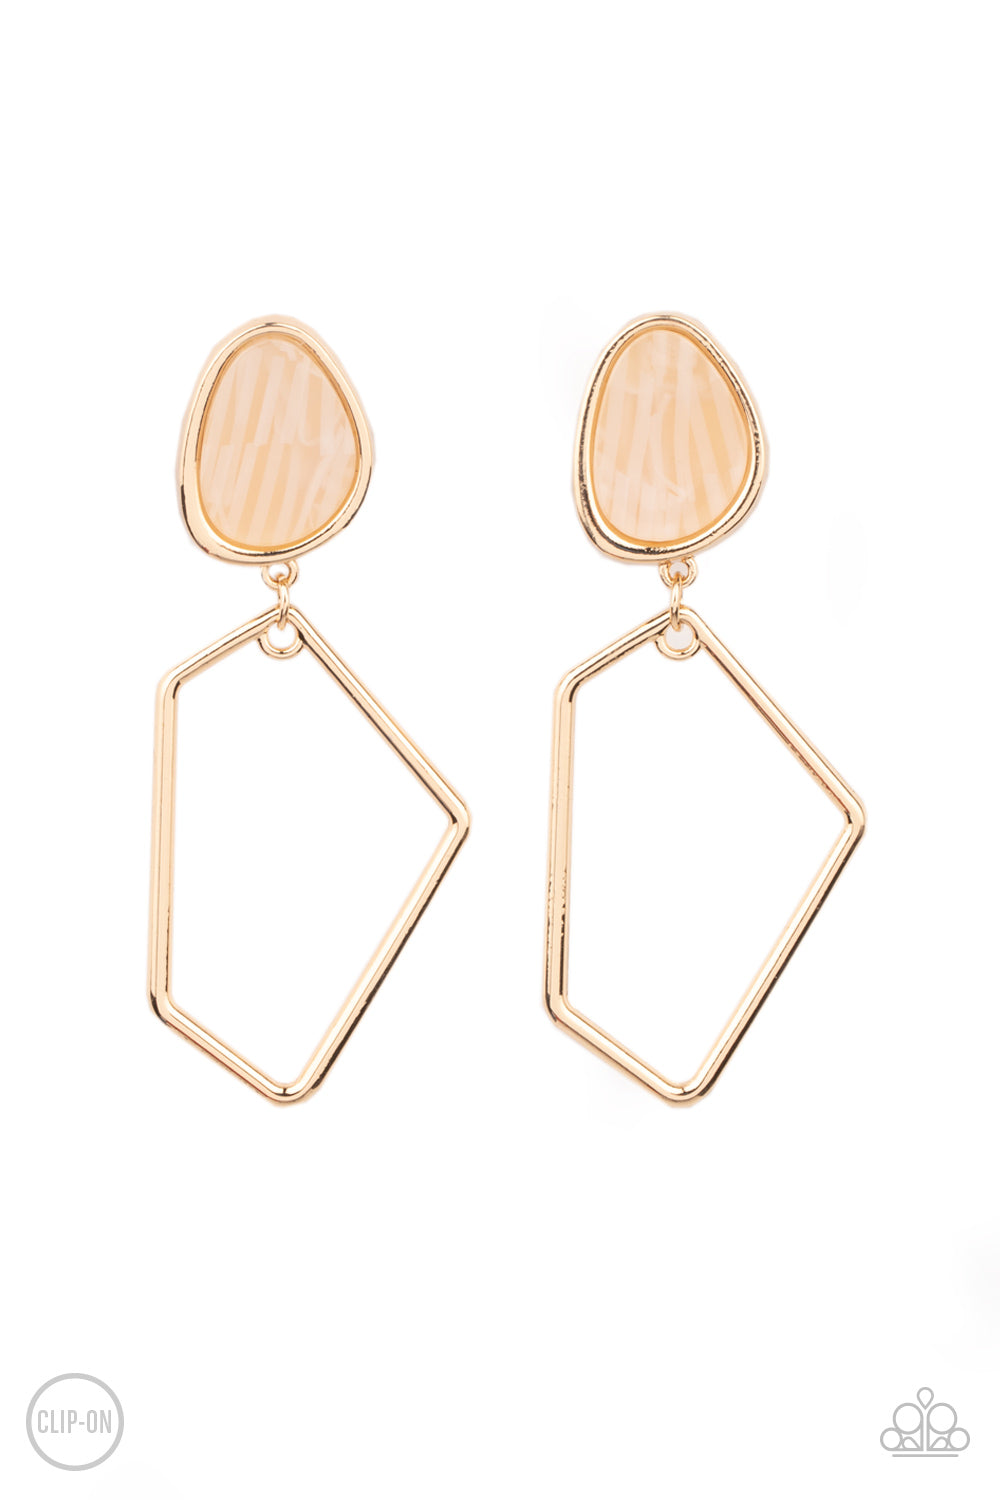 Retro Reverie Gold Clip-On Earring - Paparazzi Accessories  Encased in a classic gold fitting, an abstract faux stone fitting gives way to an airy geometric gold frame for a refined asymmetrical look. Earring attaches to a standard clip-on fitting.  All Paparazzi Accessories are lead free and nickel free!  Sold as one pair of clip-on earrings.